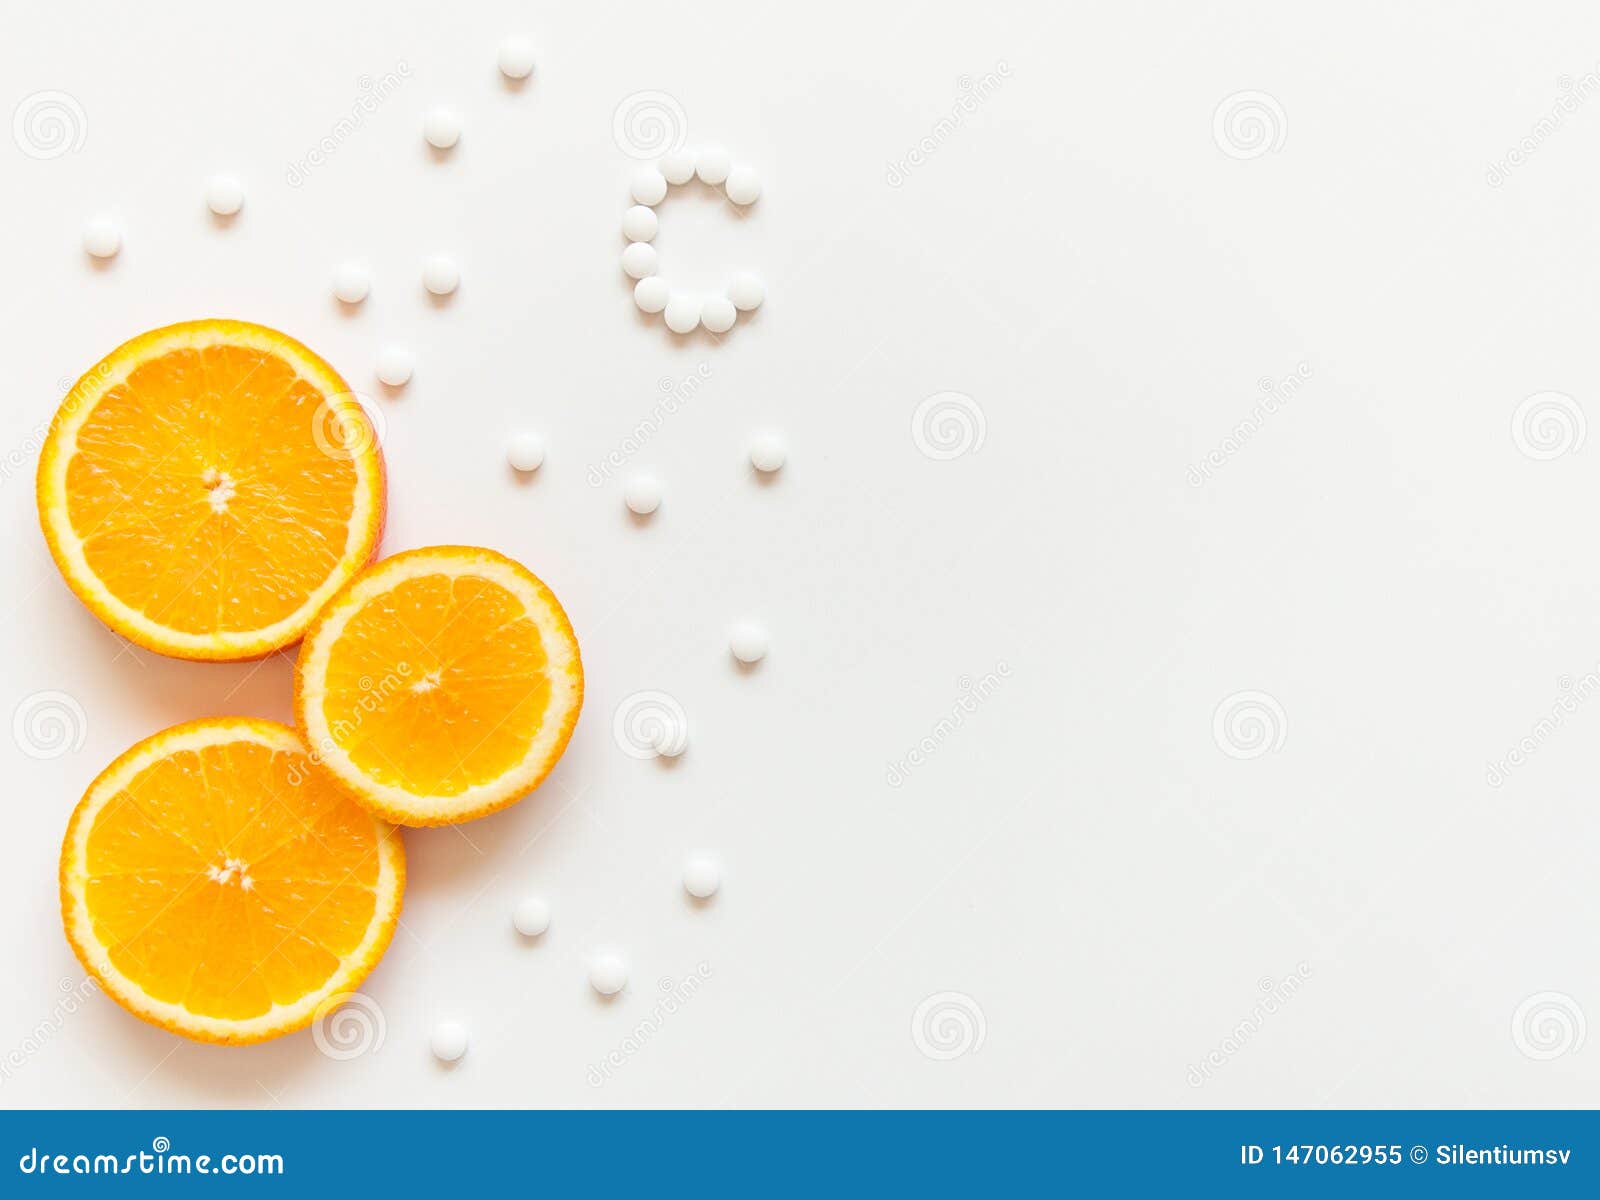 Slices of Orange on a White Background. Fruit with Vitamins. Tablets with Vitamin  C Against Colds Stock Image - Image of juicy, round: 147062955